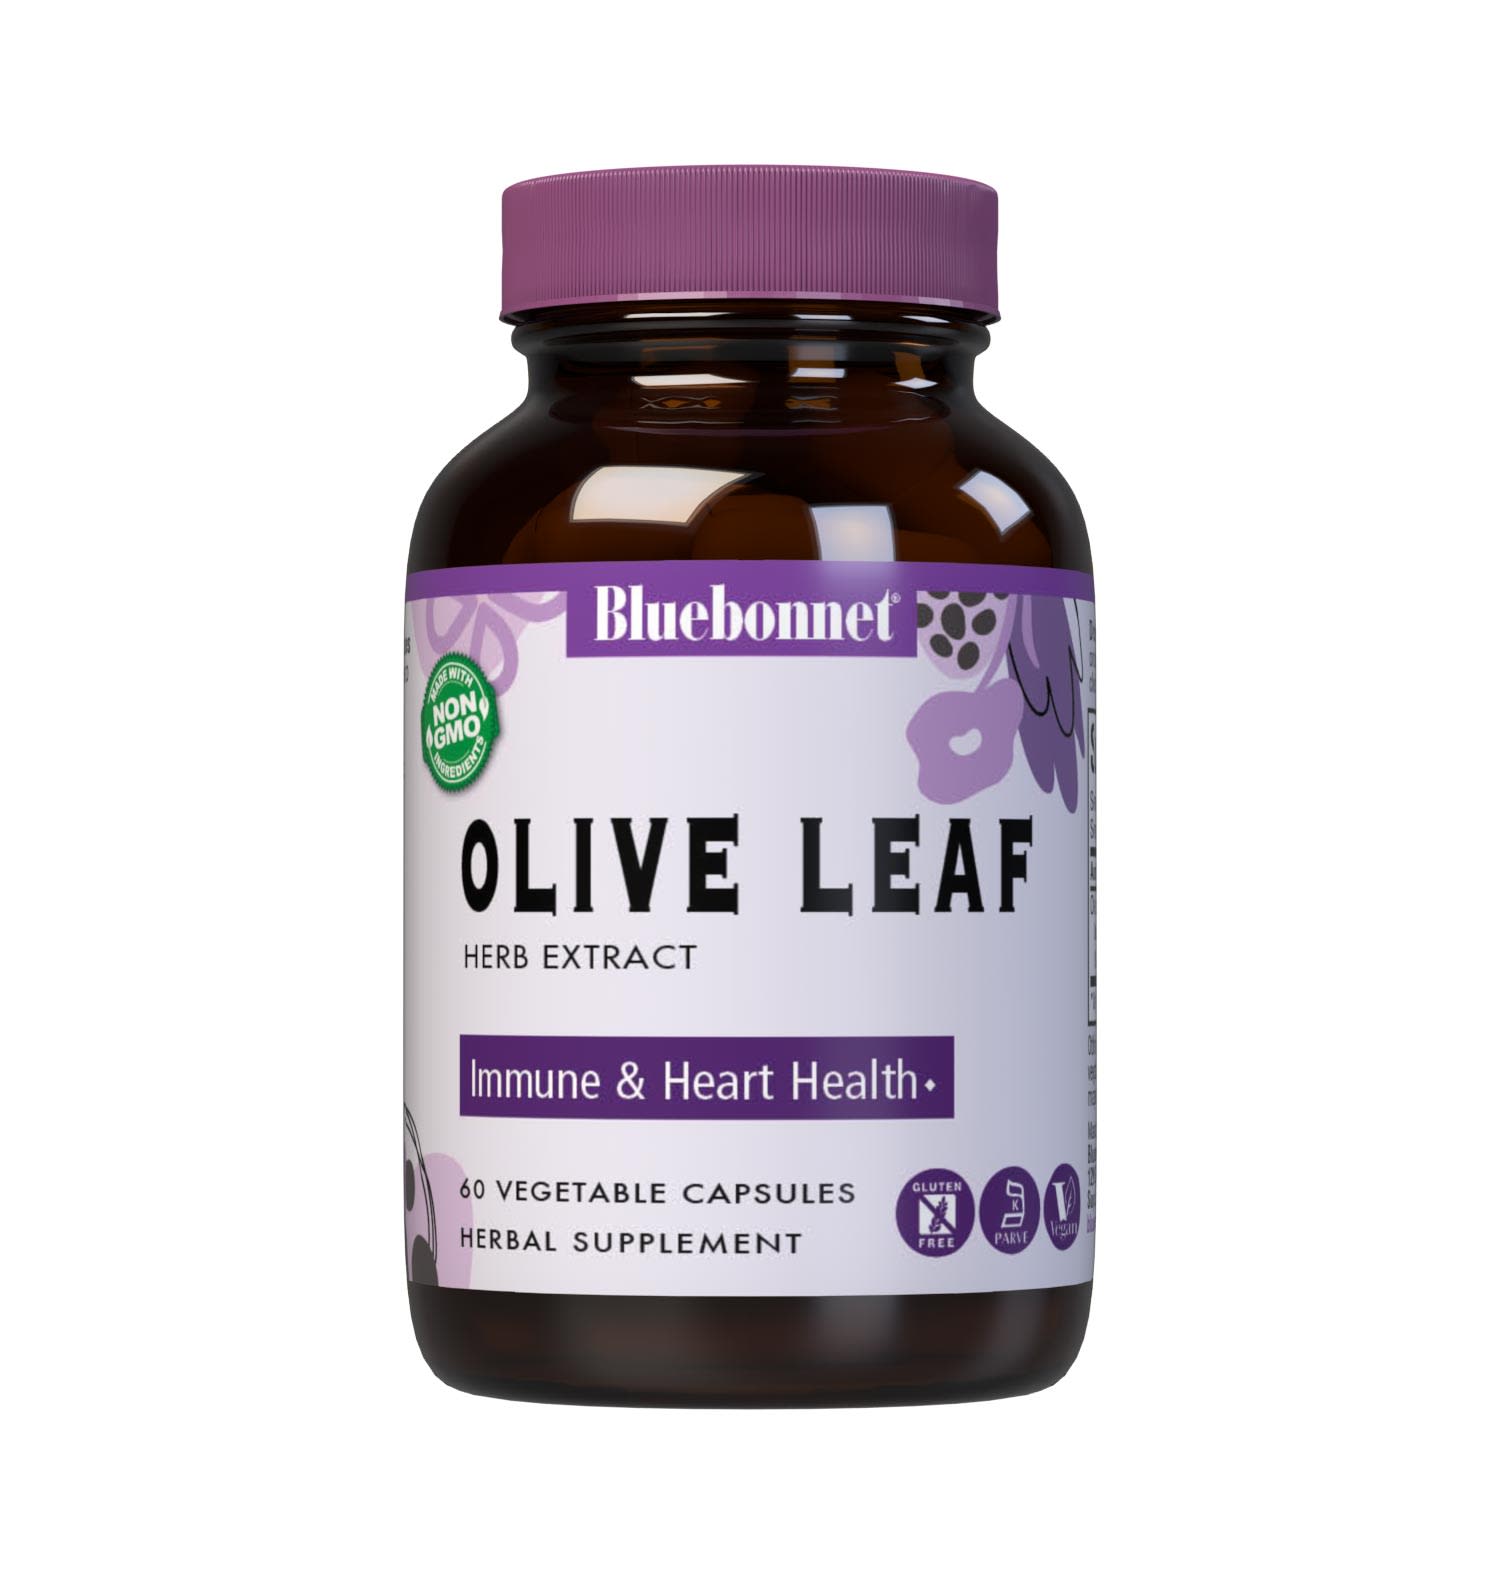 Bluebonnet’s Olive Leaf Herb Extract 60 Vegetable Capsules are formulated with a standardized extract of oleuropein, the most researched active constituent found in olive leaf. A clean and gentle water-based extraction method is employed to capture and preserve olive leaf’s most valuable components. #size_60 count